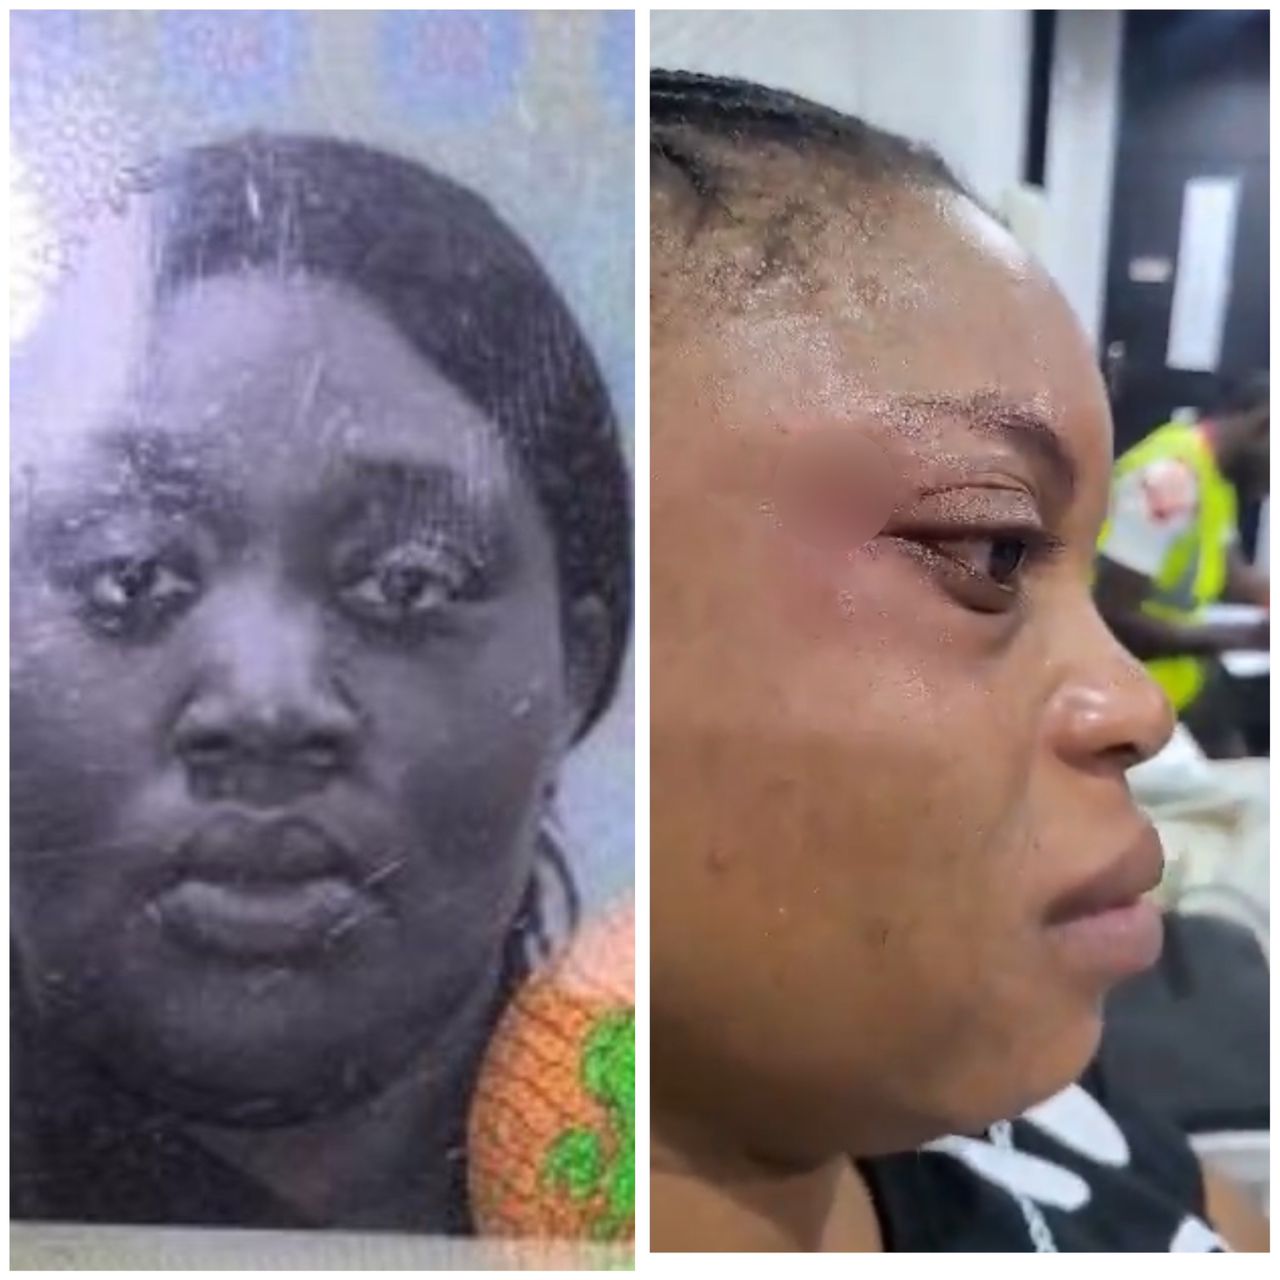 Unruly Passenger Arrested For Injuring Female Airport Official (Photo)